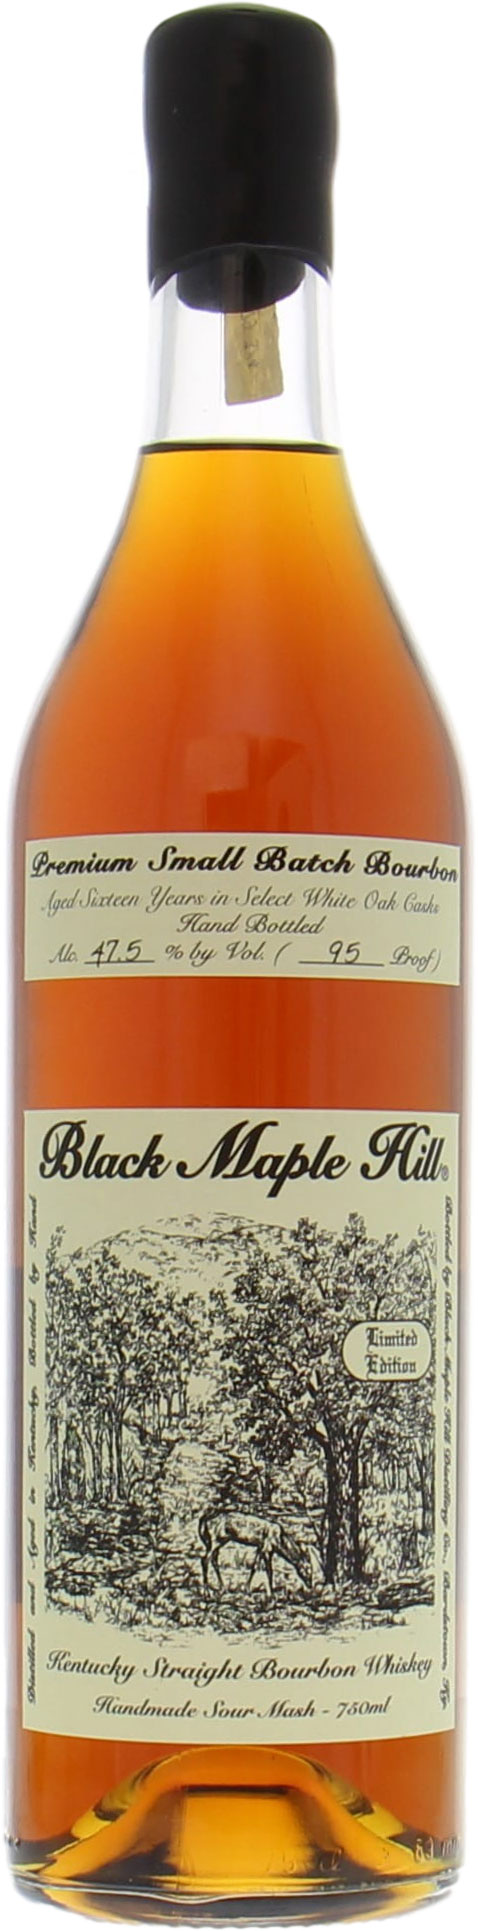 Black Maple Hill - 16 Years Old Premium Small Batch 47.5% NV Perfect